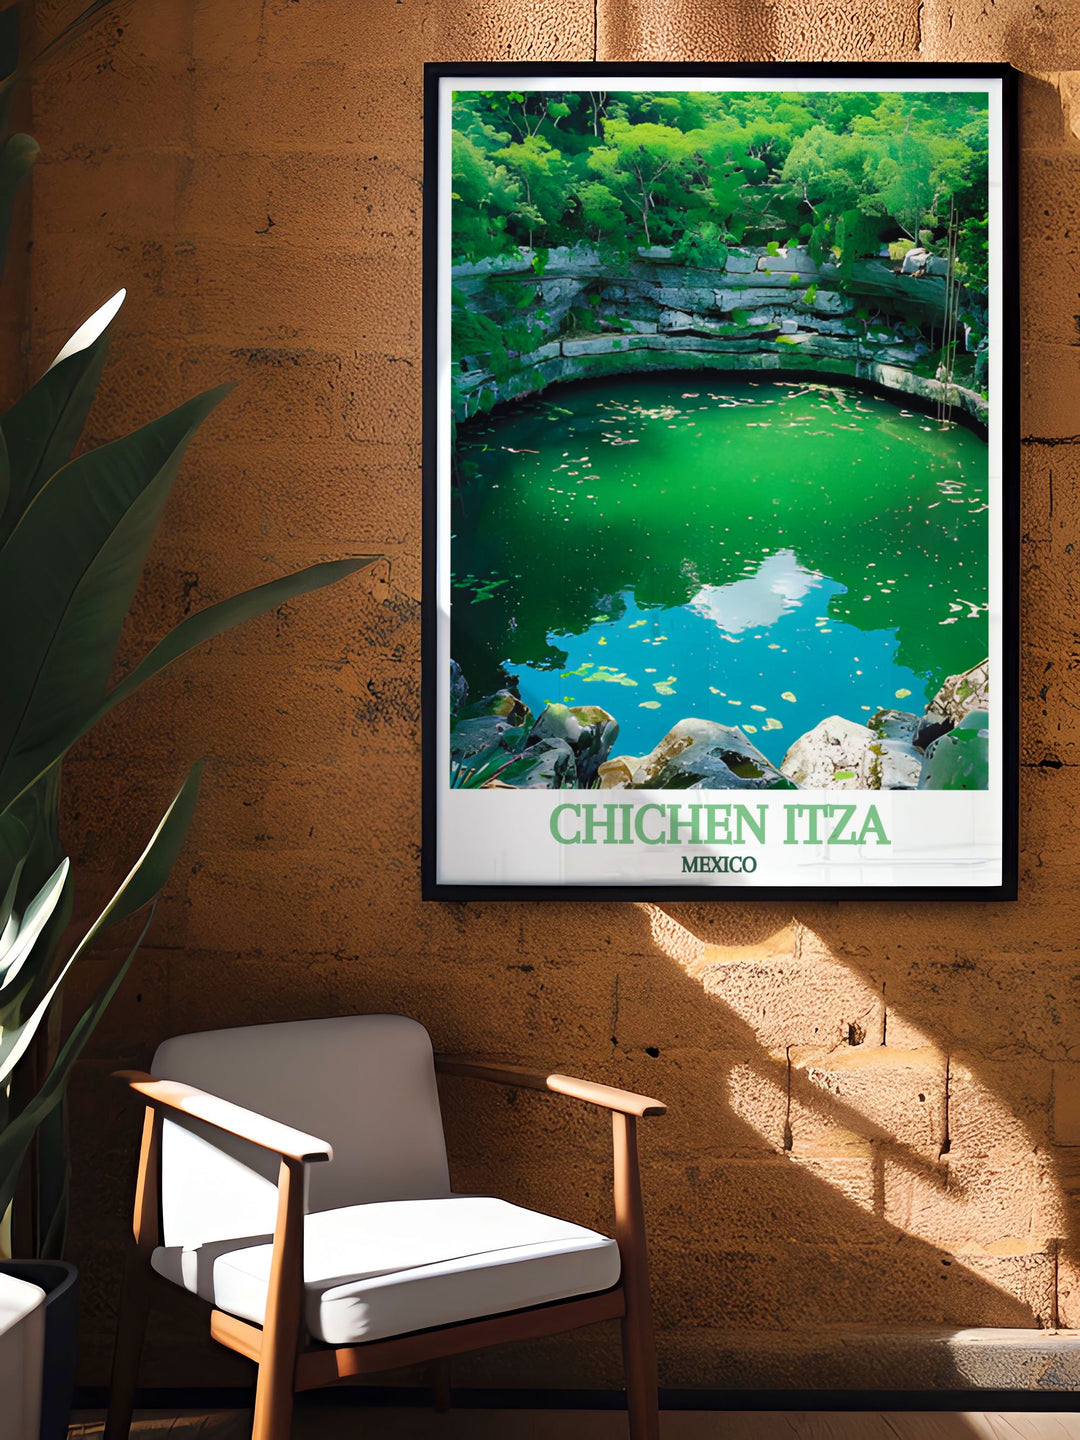 This Chichen Itza travel poster brings the ancient city to life, perfect for those who love historical landscapes. Featuring the iconic Sacred Cenote, this travel poster is perfect for those who appreciate Mexicos archaeological and cultural richness.